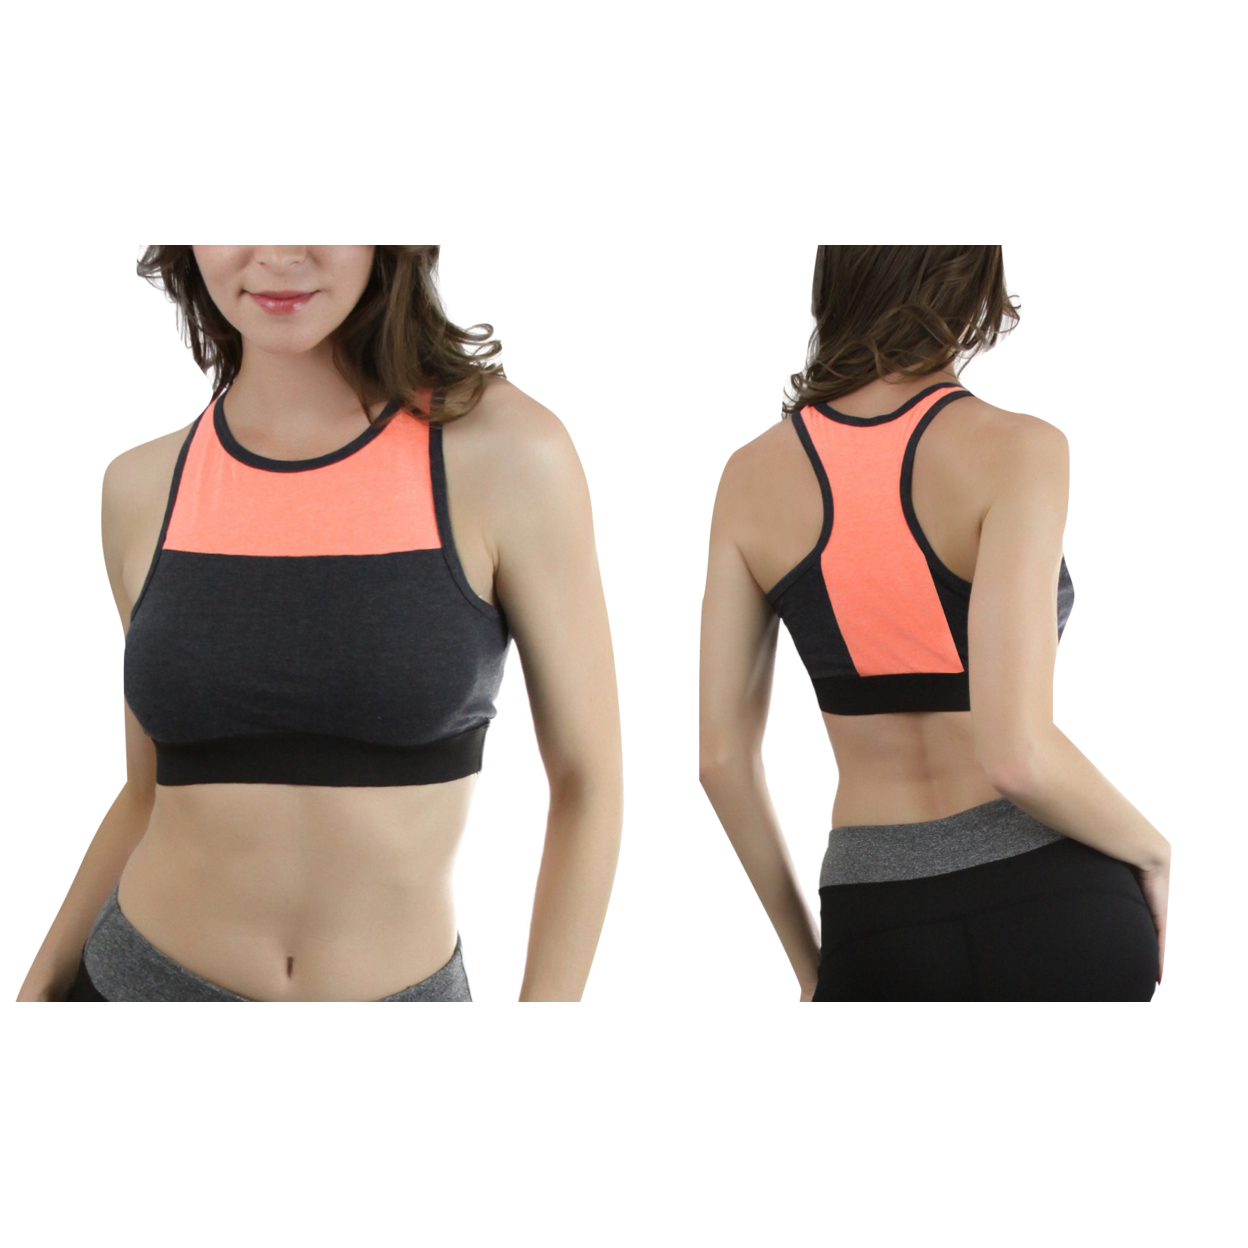 Single Or 2-Pack Of Women's Color-Block Two Tone Cotton-Blend Bra - Black/Neon Pink & Charcoal/Neon Coral, Medium